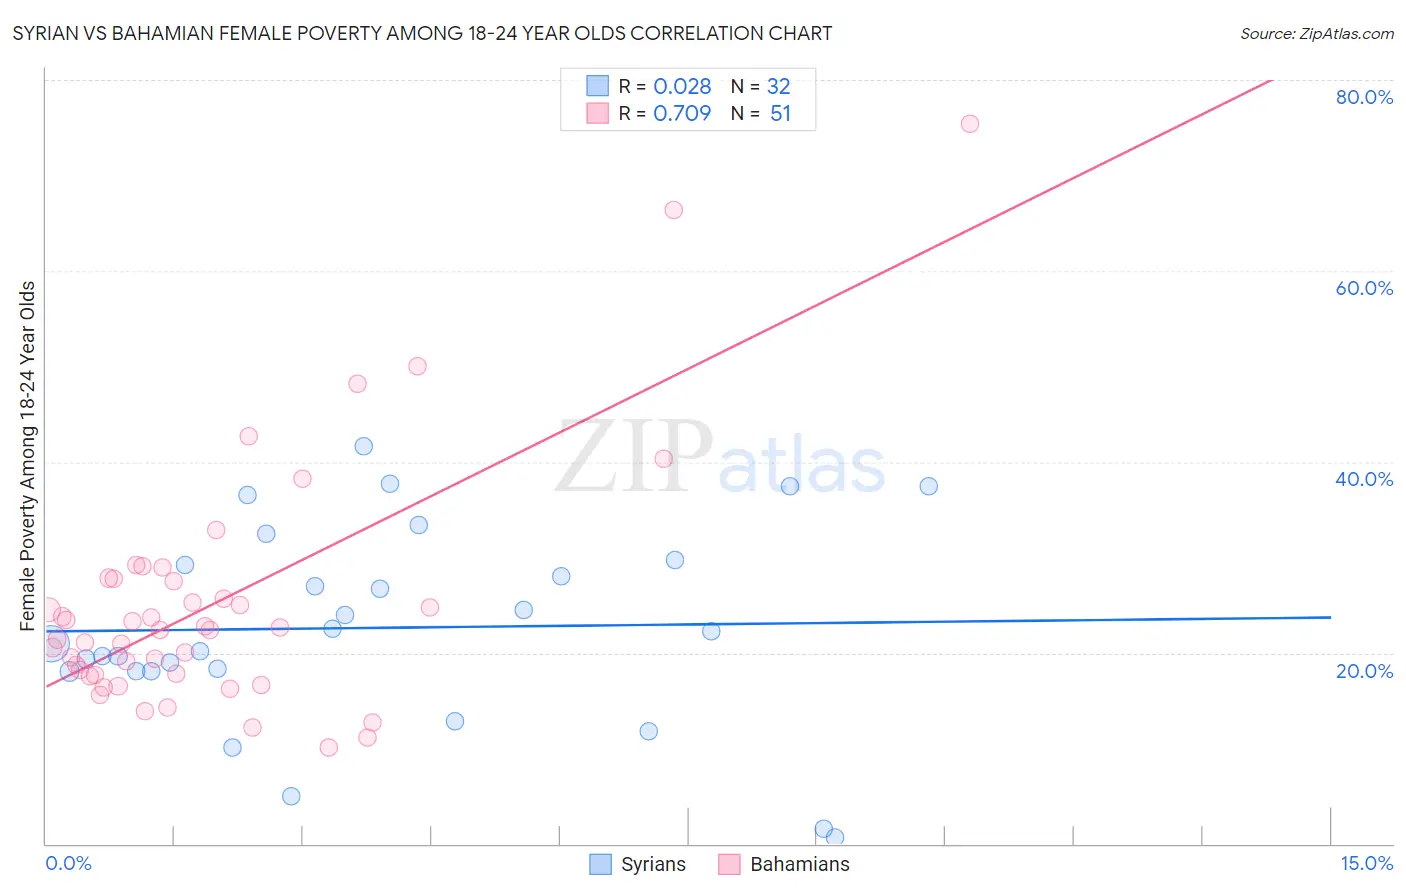 Syrian vs Bahamian Female Poverty Among 18-24 Year Olds